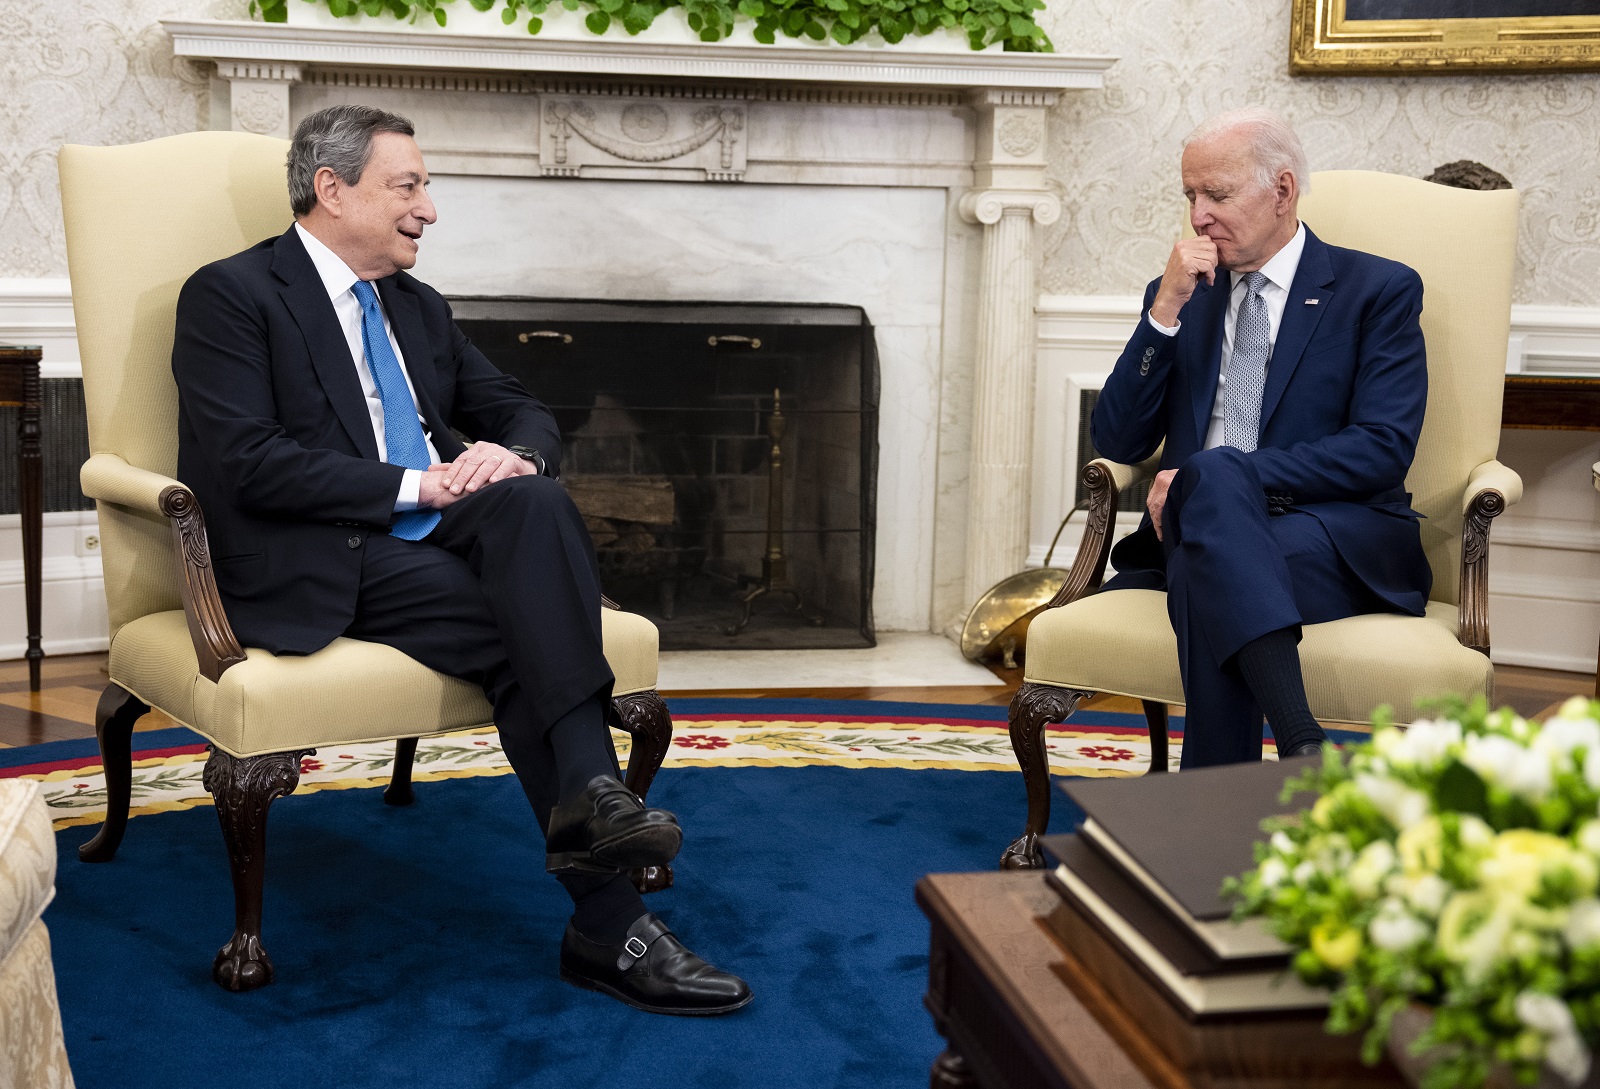 epa09938679 US President Joe Biden (R) meets with Italian Prime Minister Mario Draghi (L) in the Oval Office, at the White House, in Washington, DC, USA, 10 May 2022.  EPA/Doug Mills / POOL